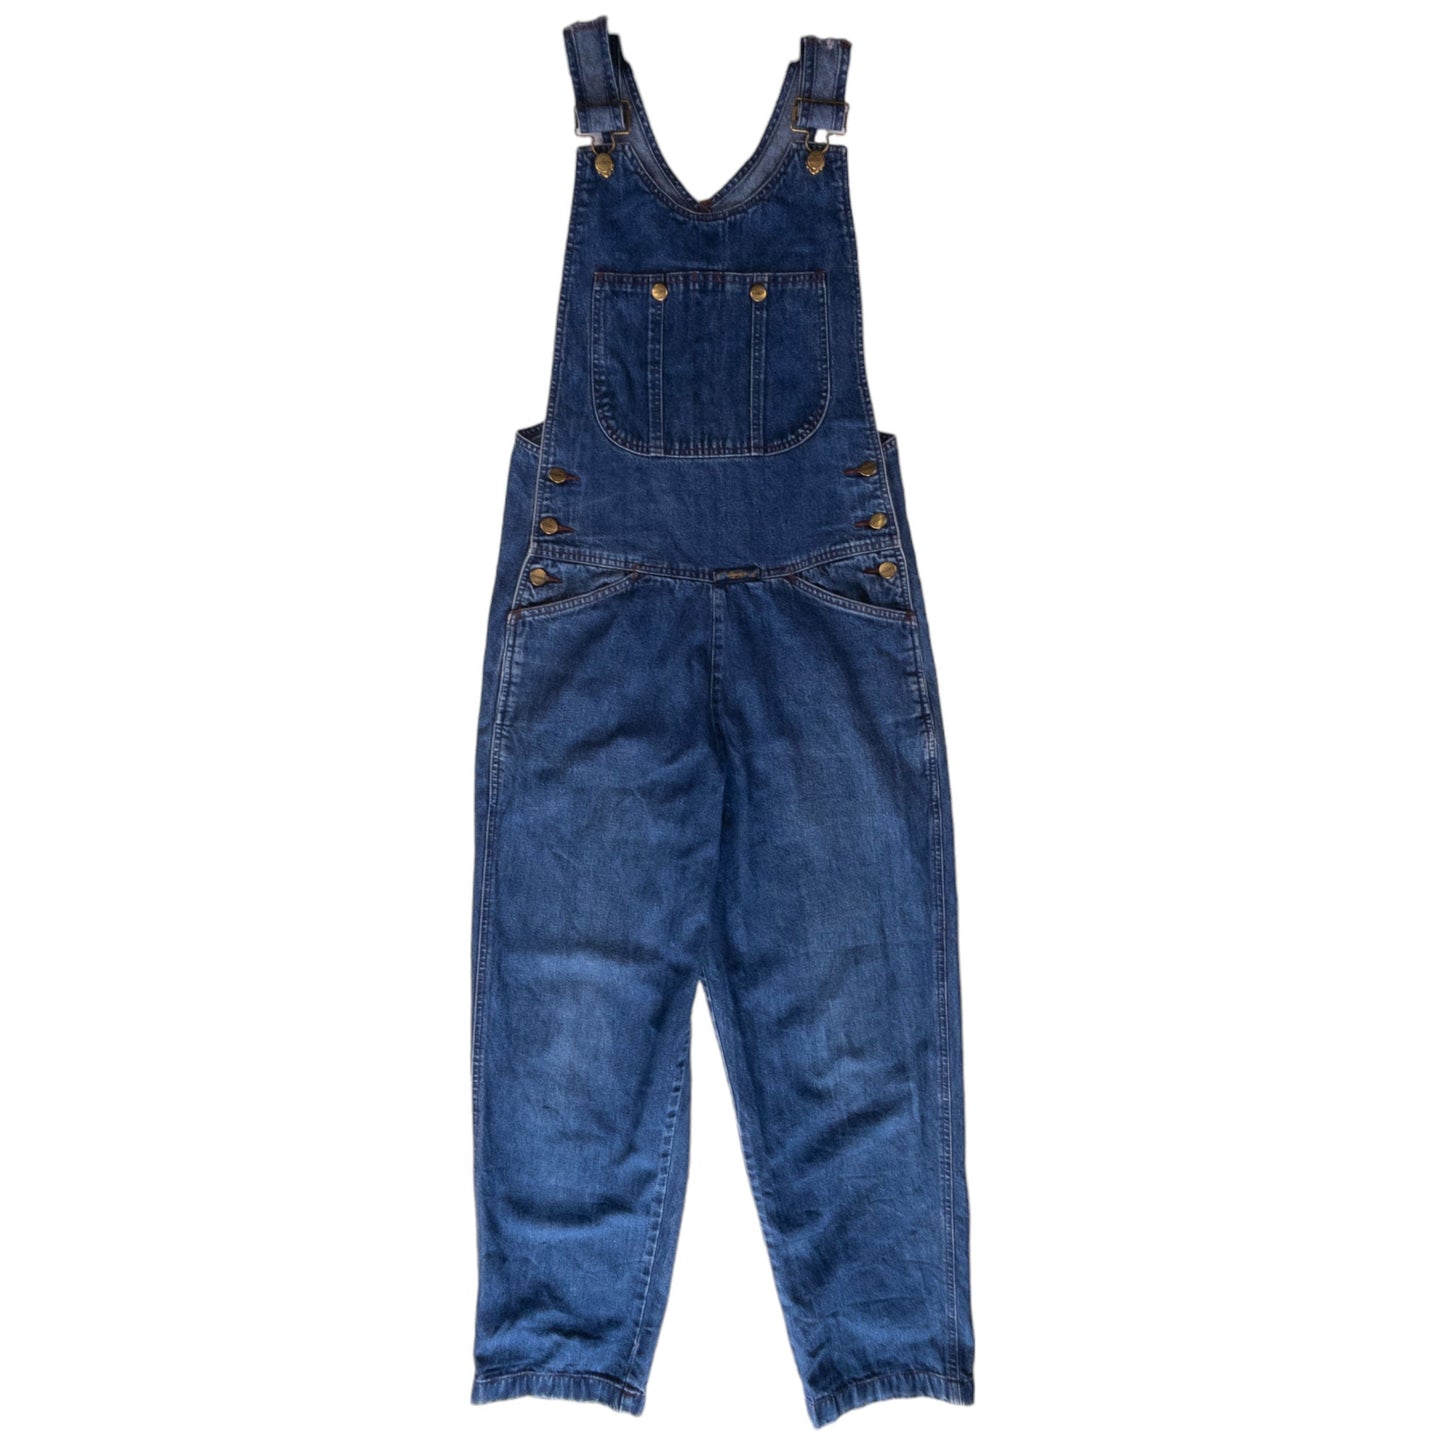 Vintage Marithe + Francois Girbaud Dungarees Size S